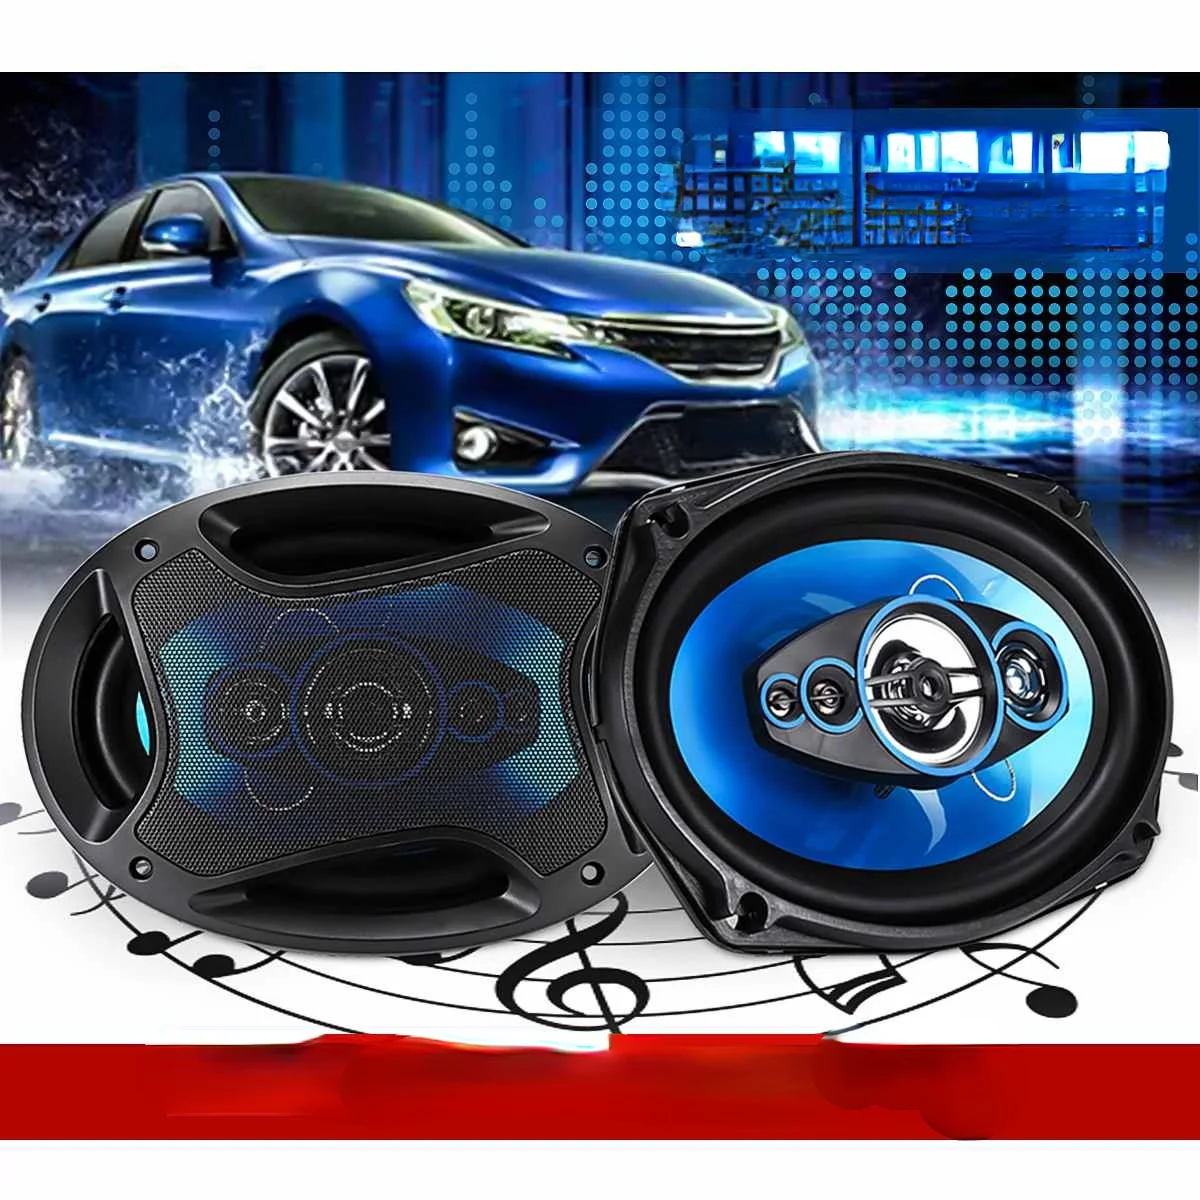 

2 Pcs 1000W 12V 6.9 Inch Car Speaker 2 Way HIFI Audio Car Music Stereo Coaxial Subwoofer Tweeter Stereo Surround Audio Speaker